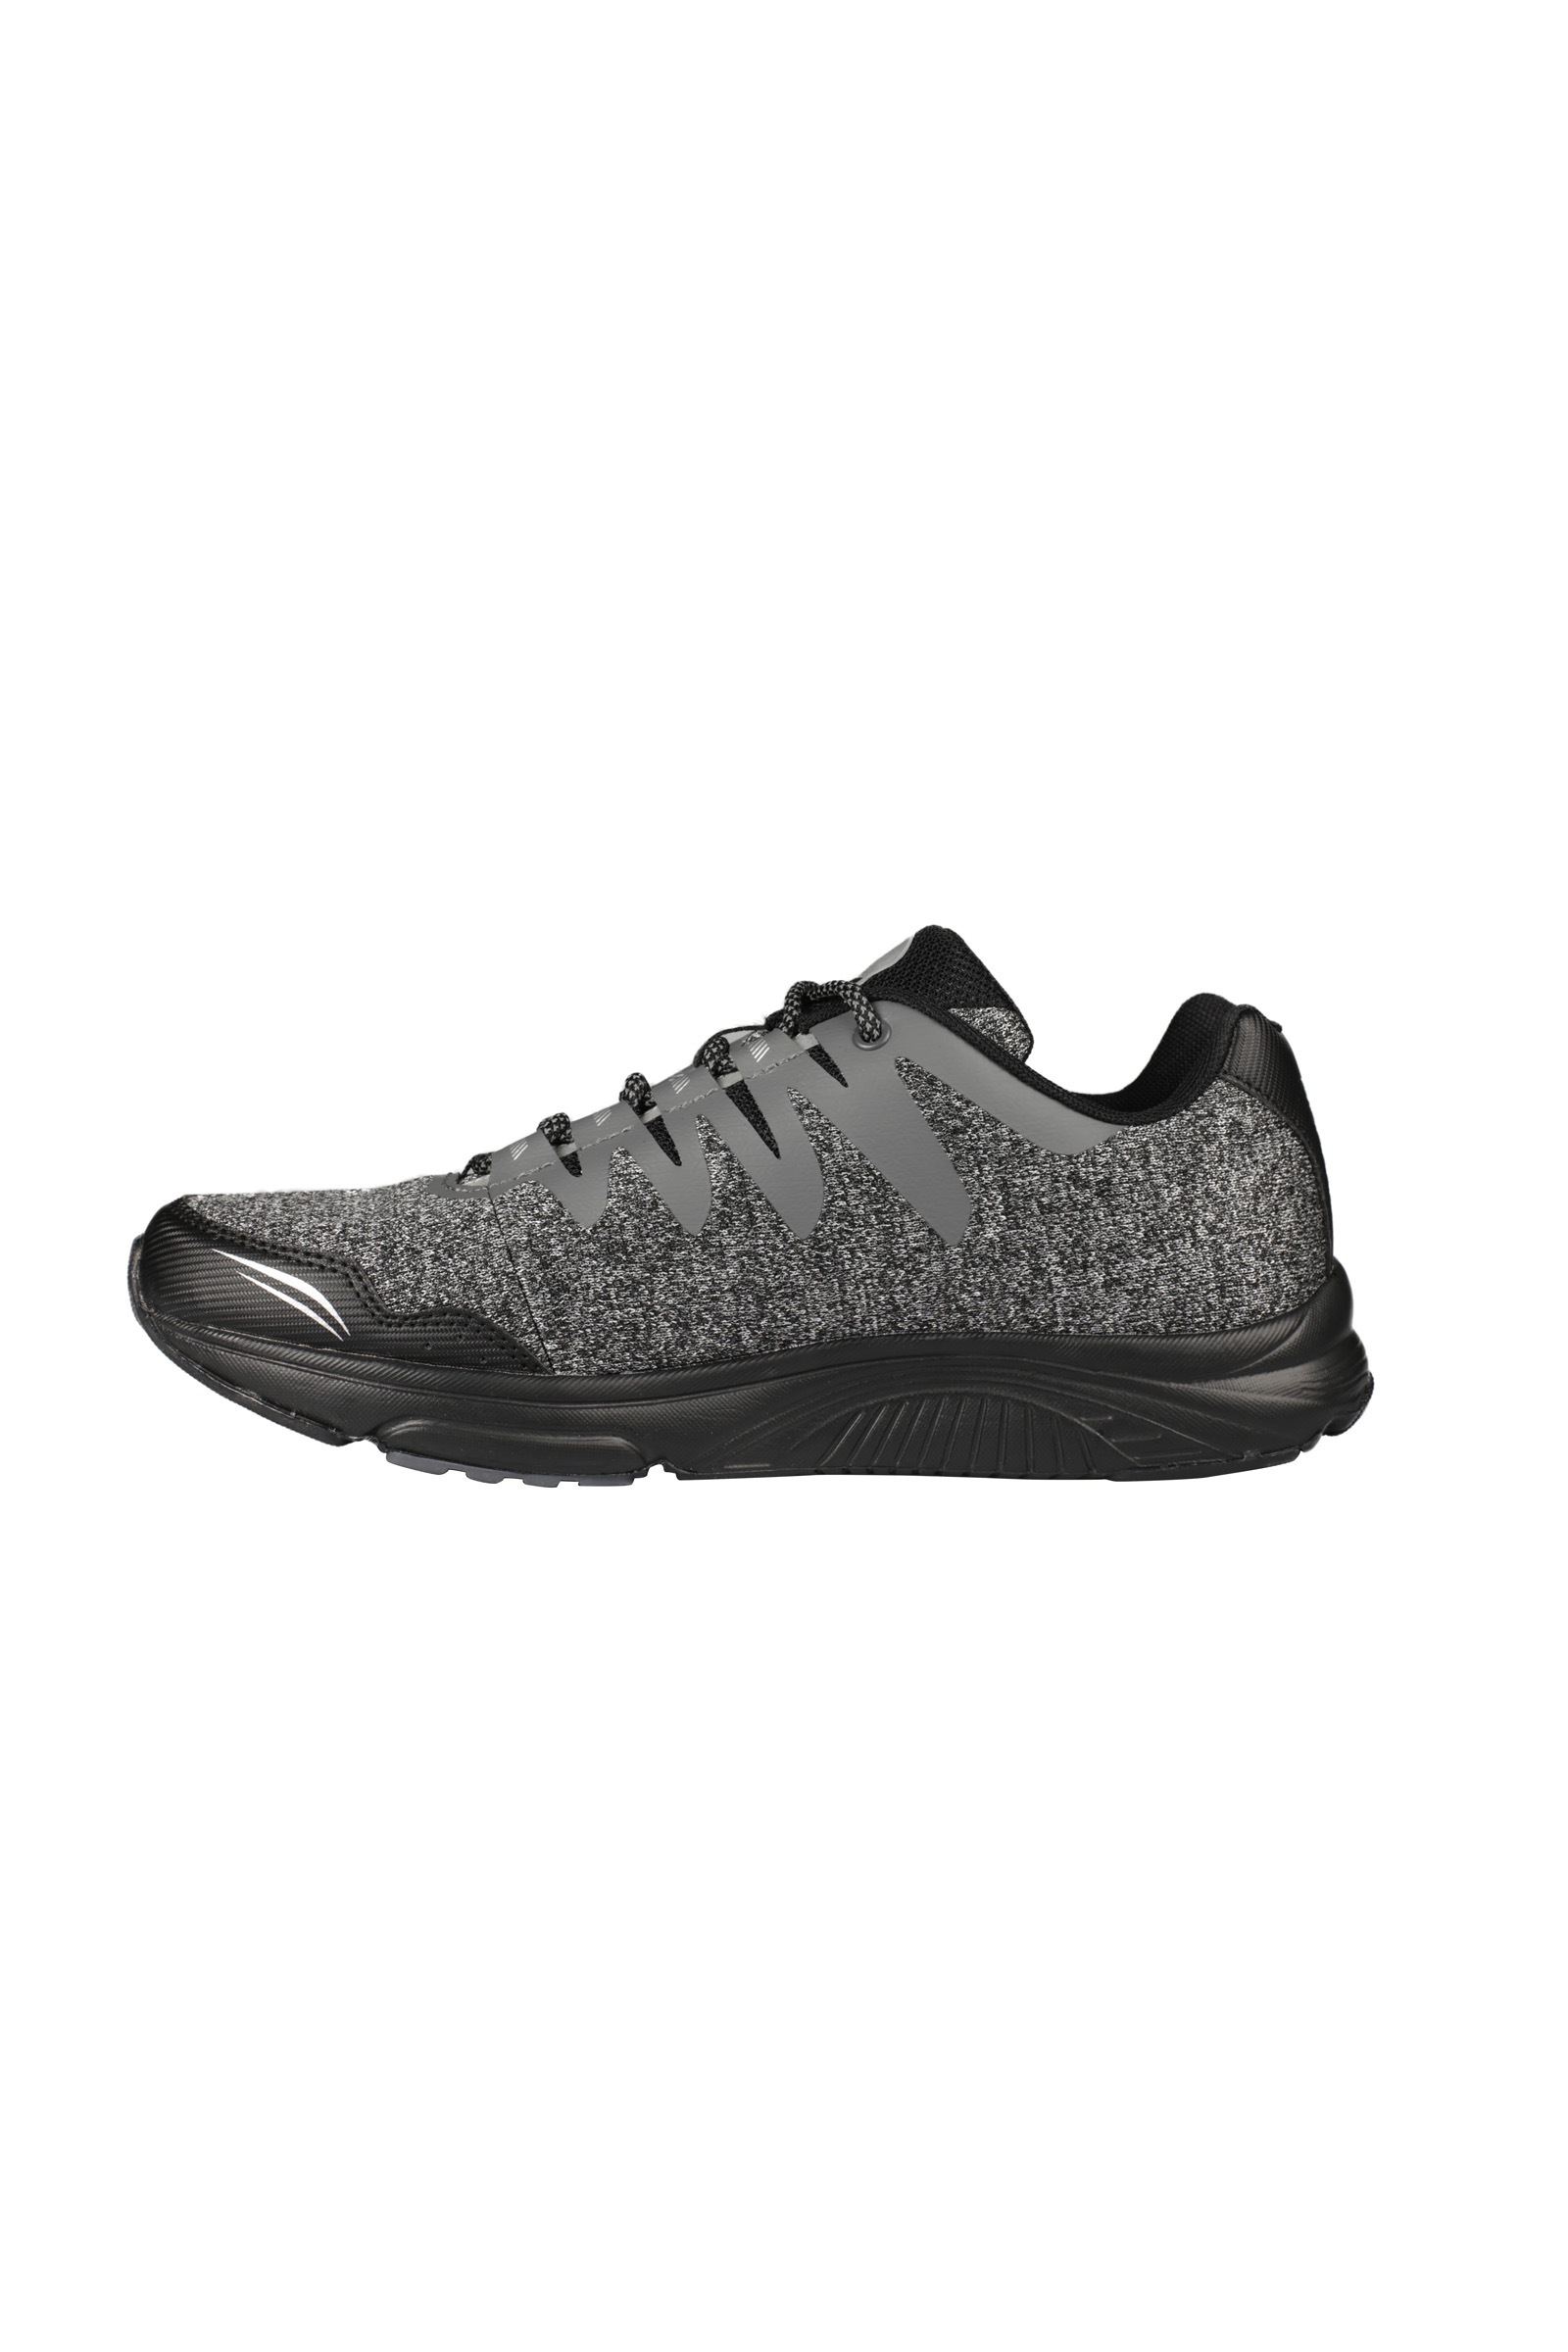 RUNNING KNIT SHOES - Outlet Hydrogen - Abbigliamento sportivo